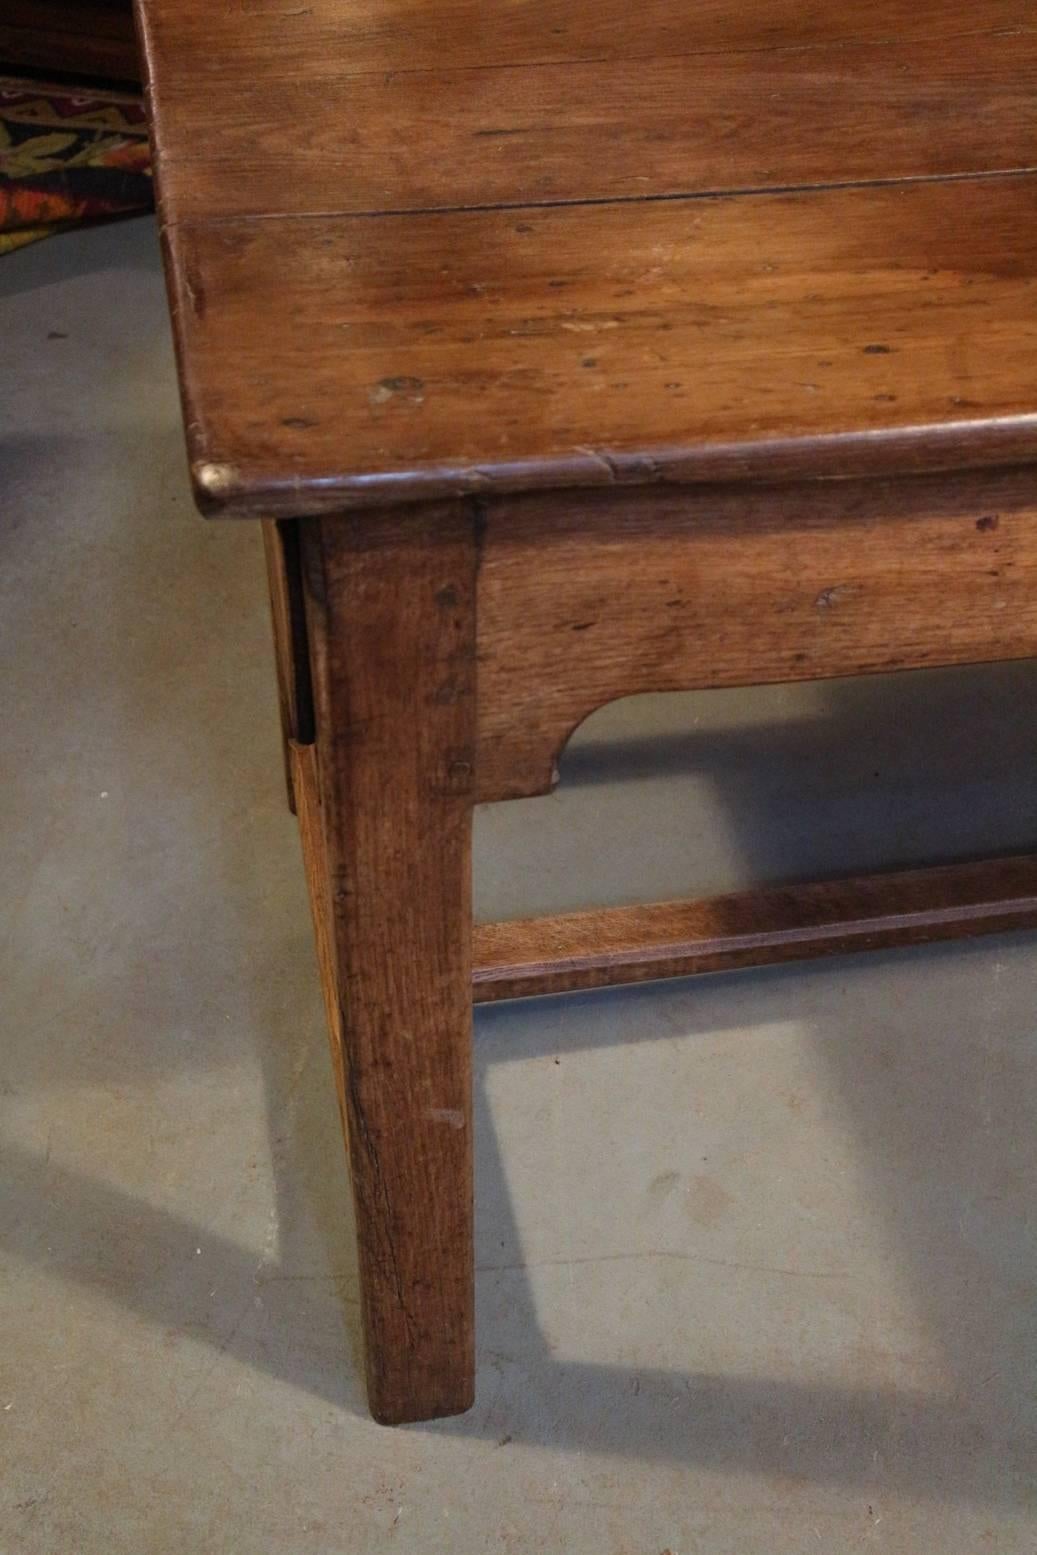 Beautiful weathered French chestnut dining room table. A long time ago the table has been adjusted to get more leg room. As a result, the drawers on the end faces are dummies. There is one small drawer in the middle. Table is in original unrestored